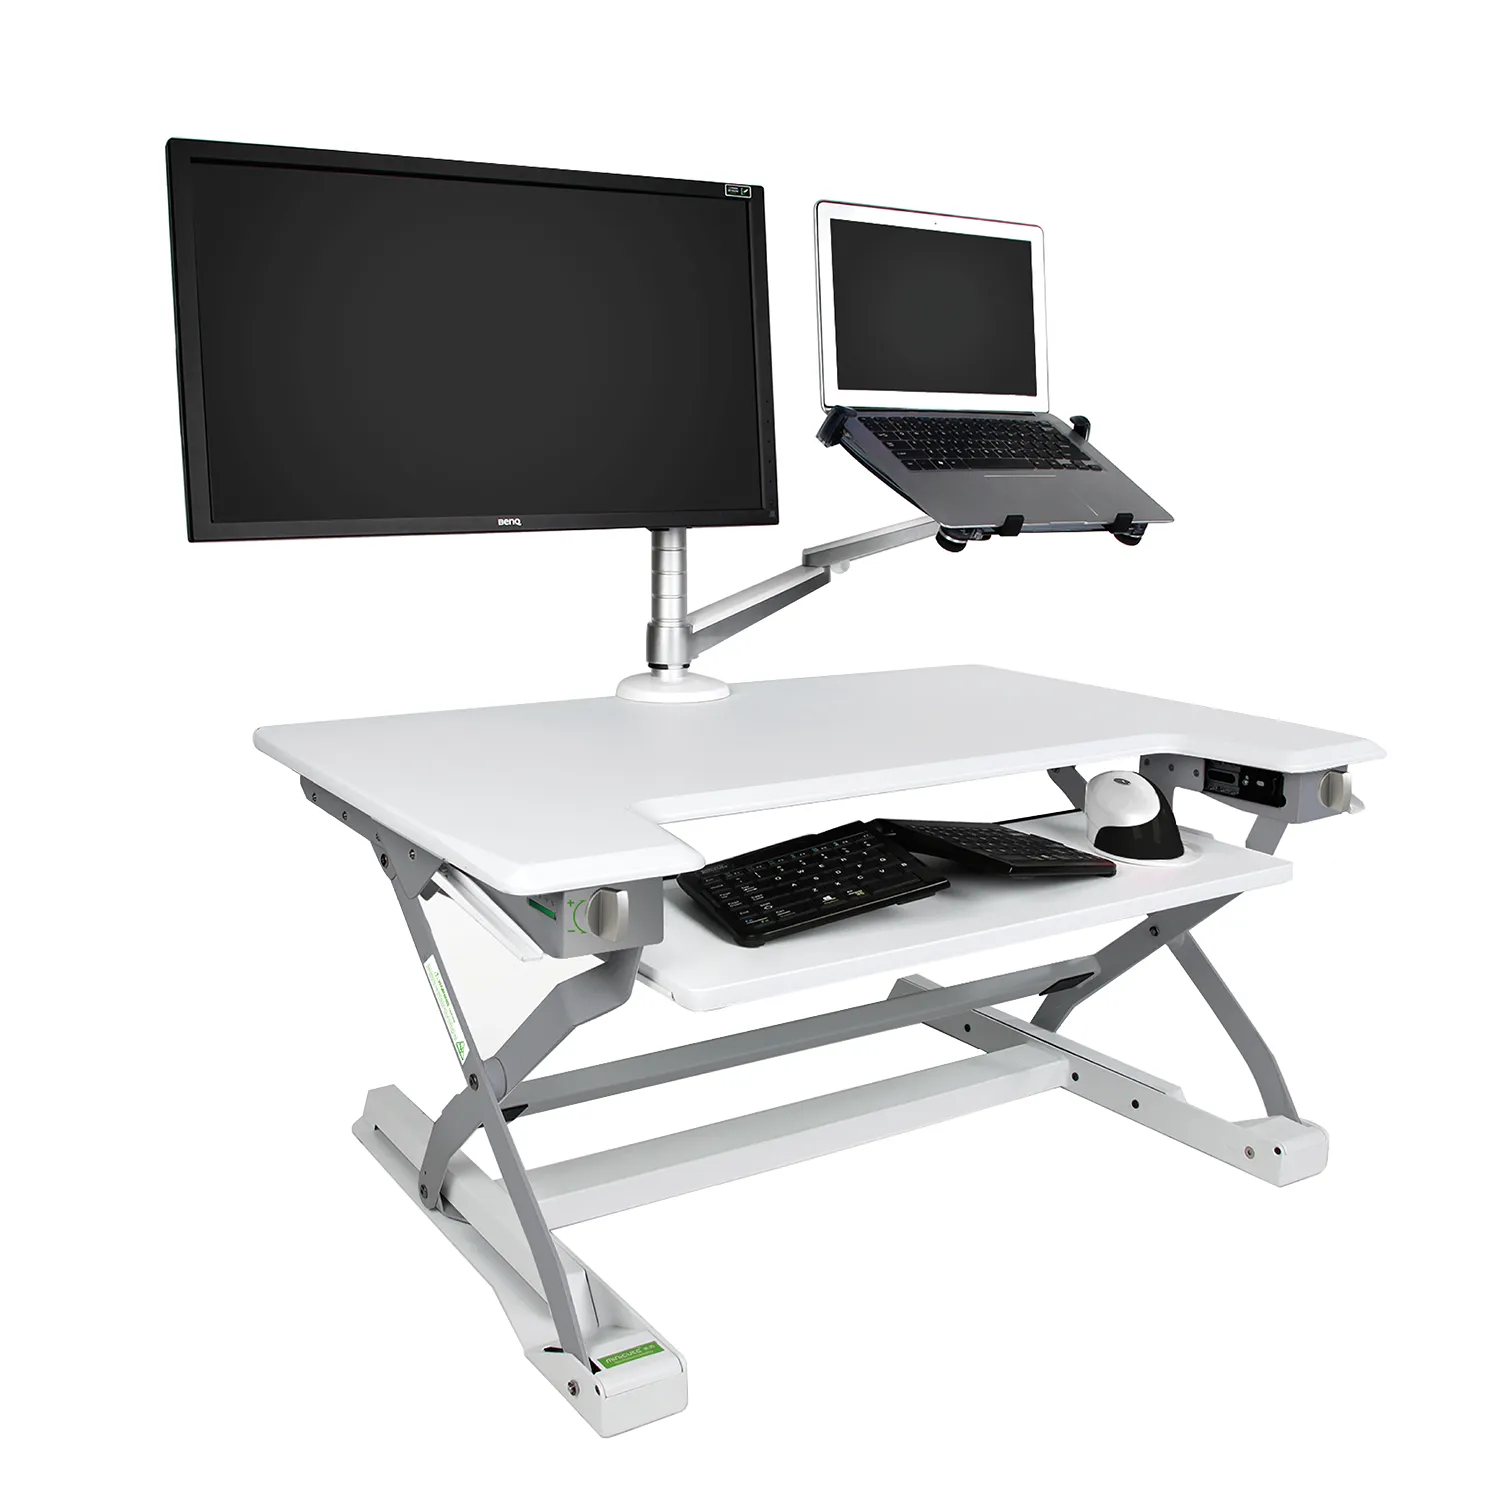 Transform your workspace with the EasyLift Sit/Stand Desk Converter in our 50% off Summer Sale